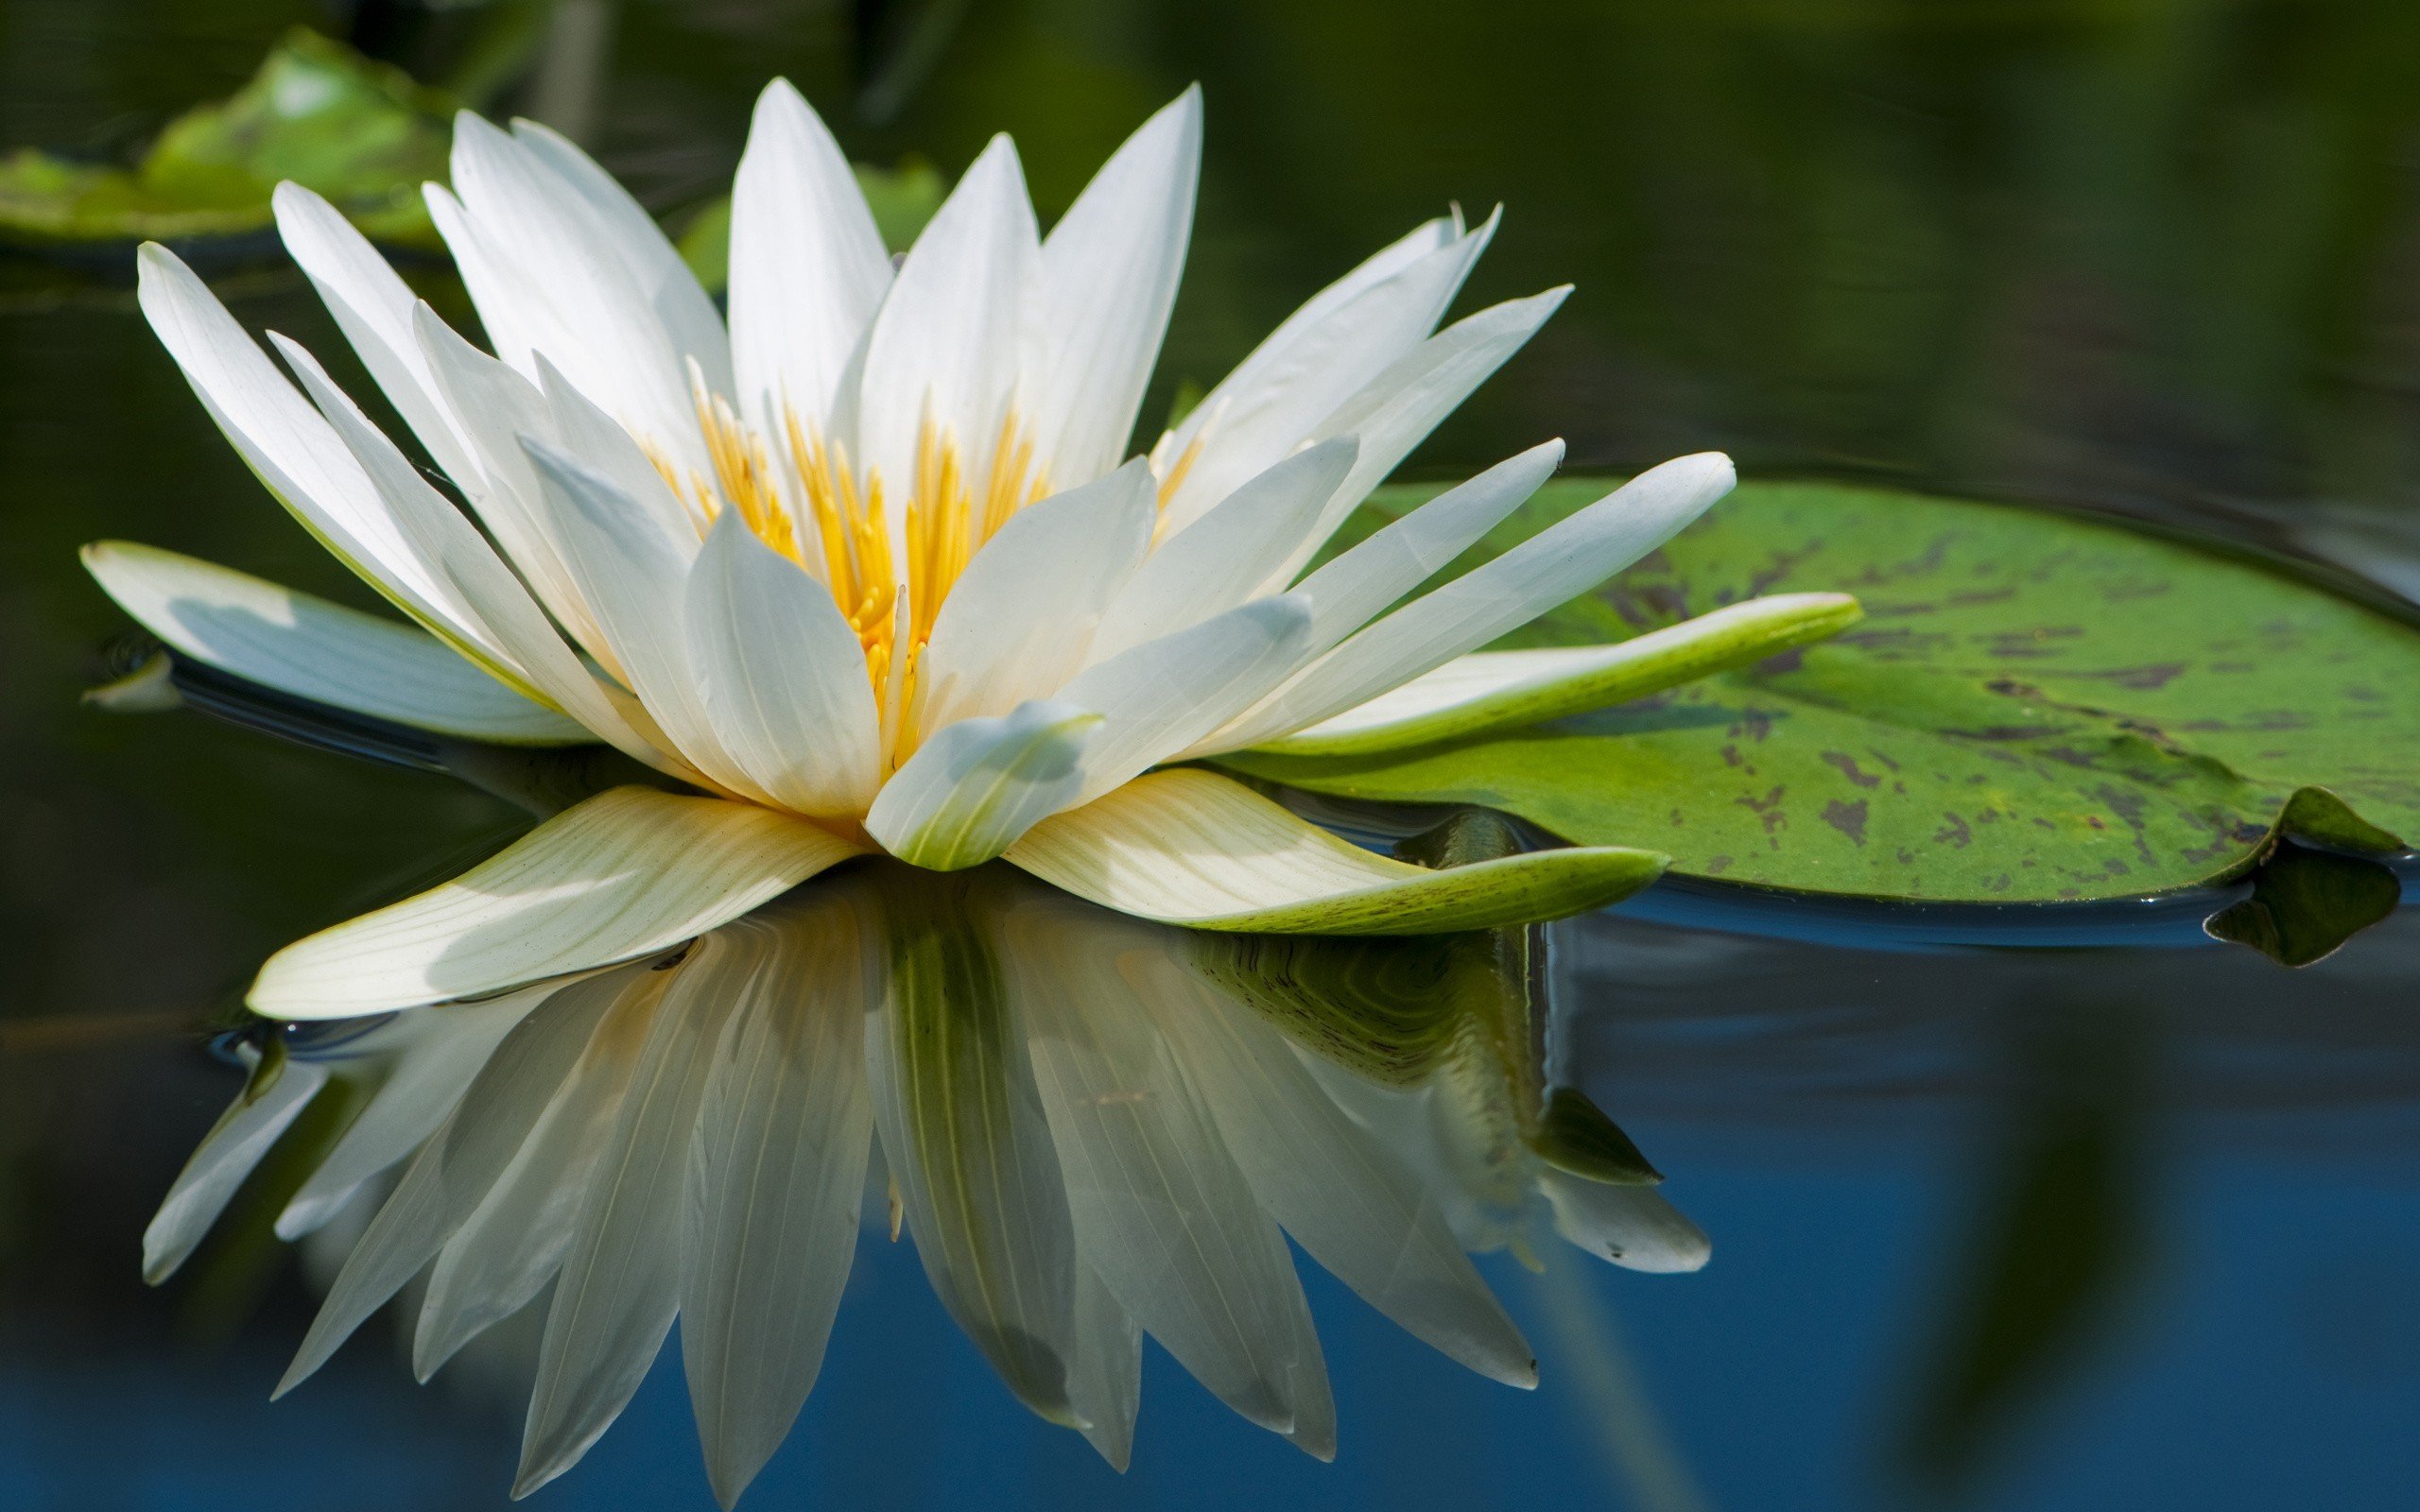 Wallpapers nature water lilies on the desktop